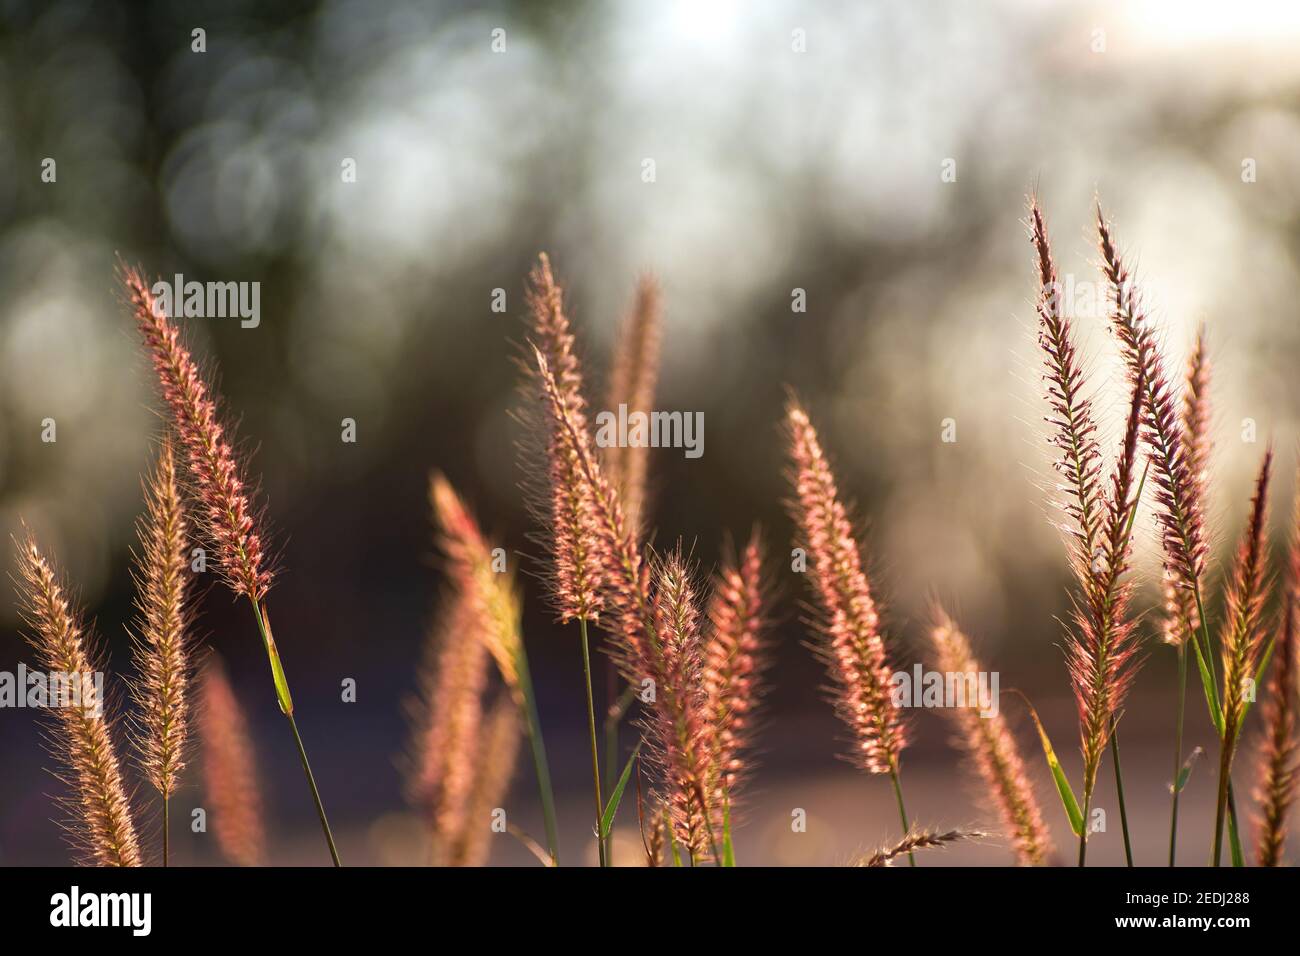 Fur foxtail grass on a sunny day Stock Photo